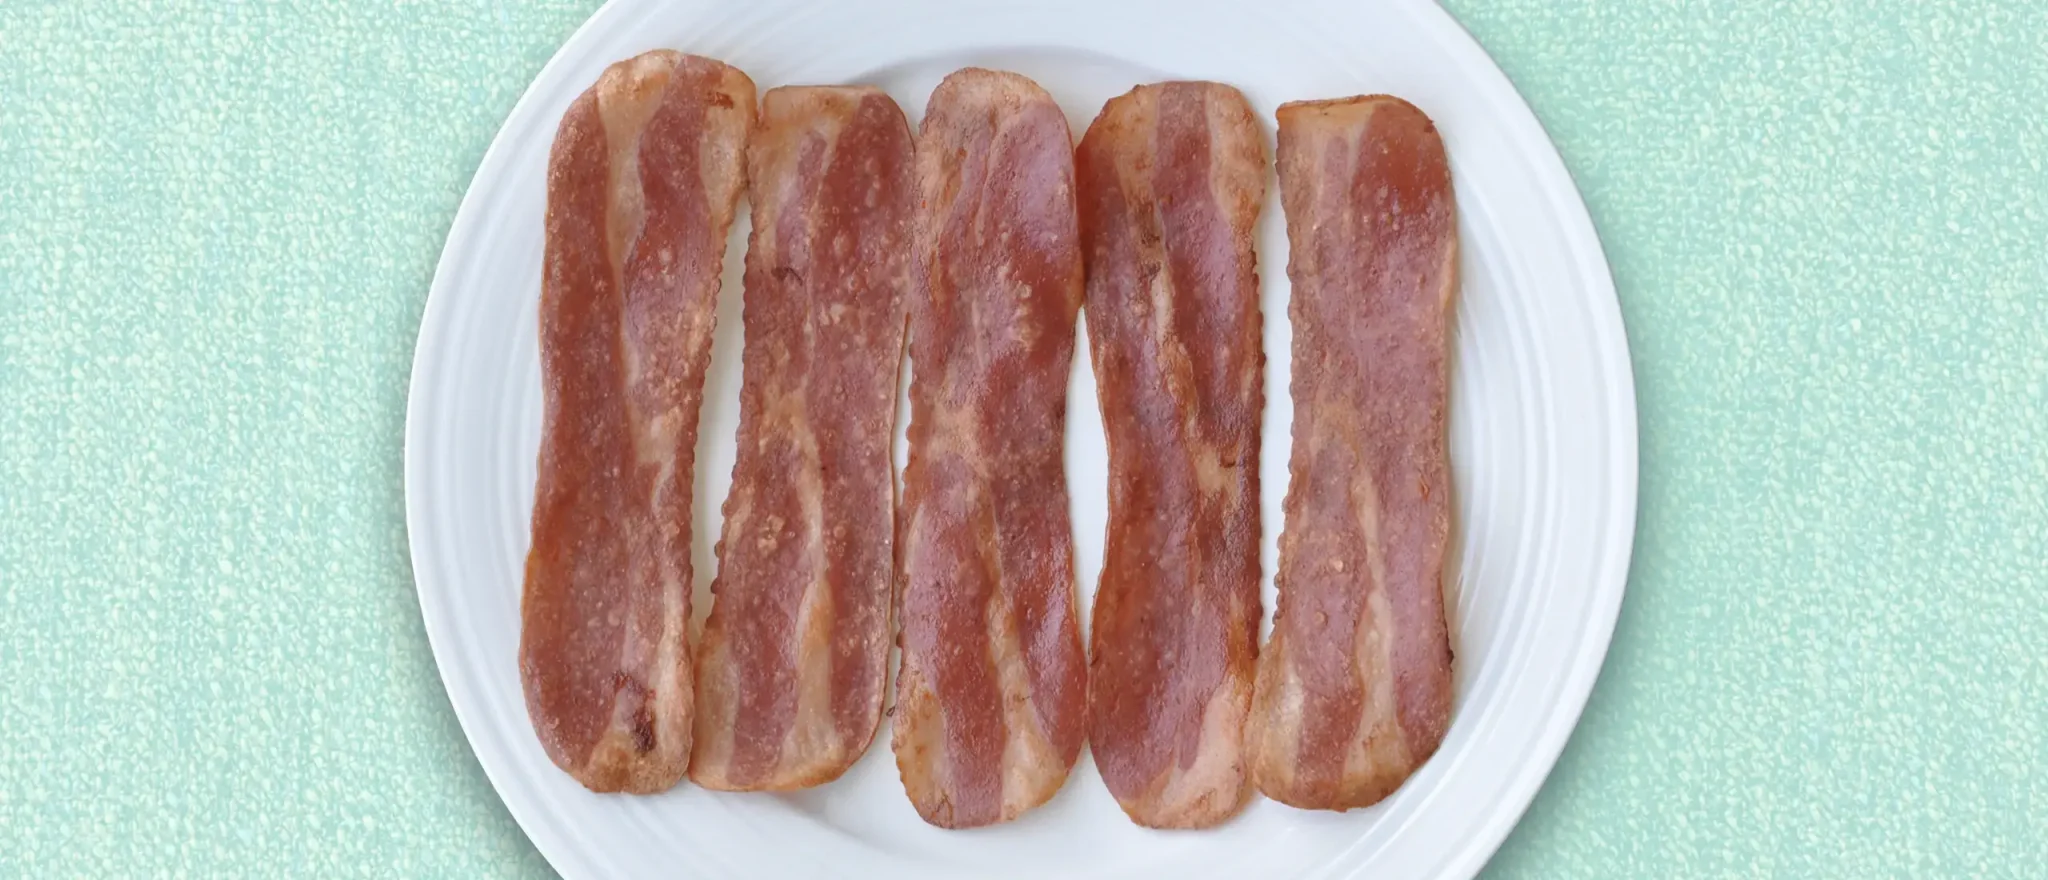 Turkey Bacon Is Healthier Than Bacon, But Is It Healthy?